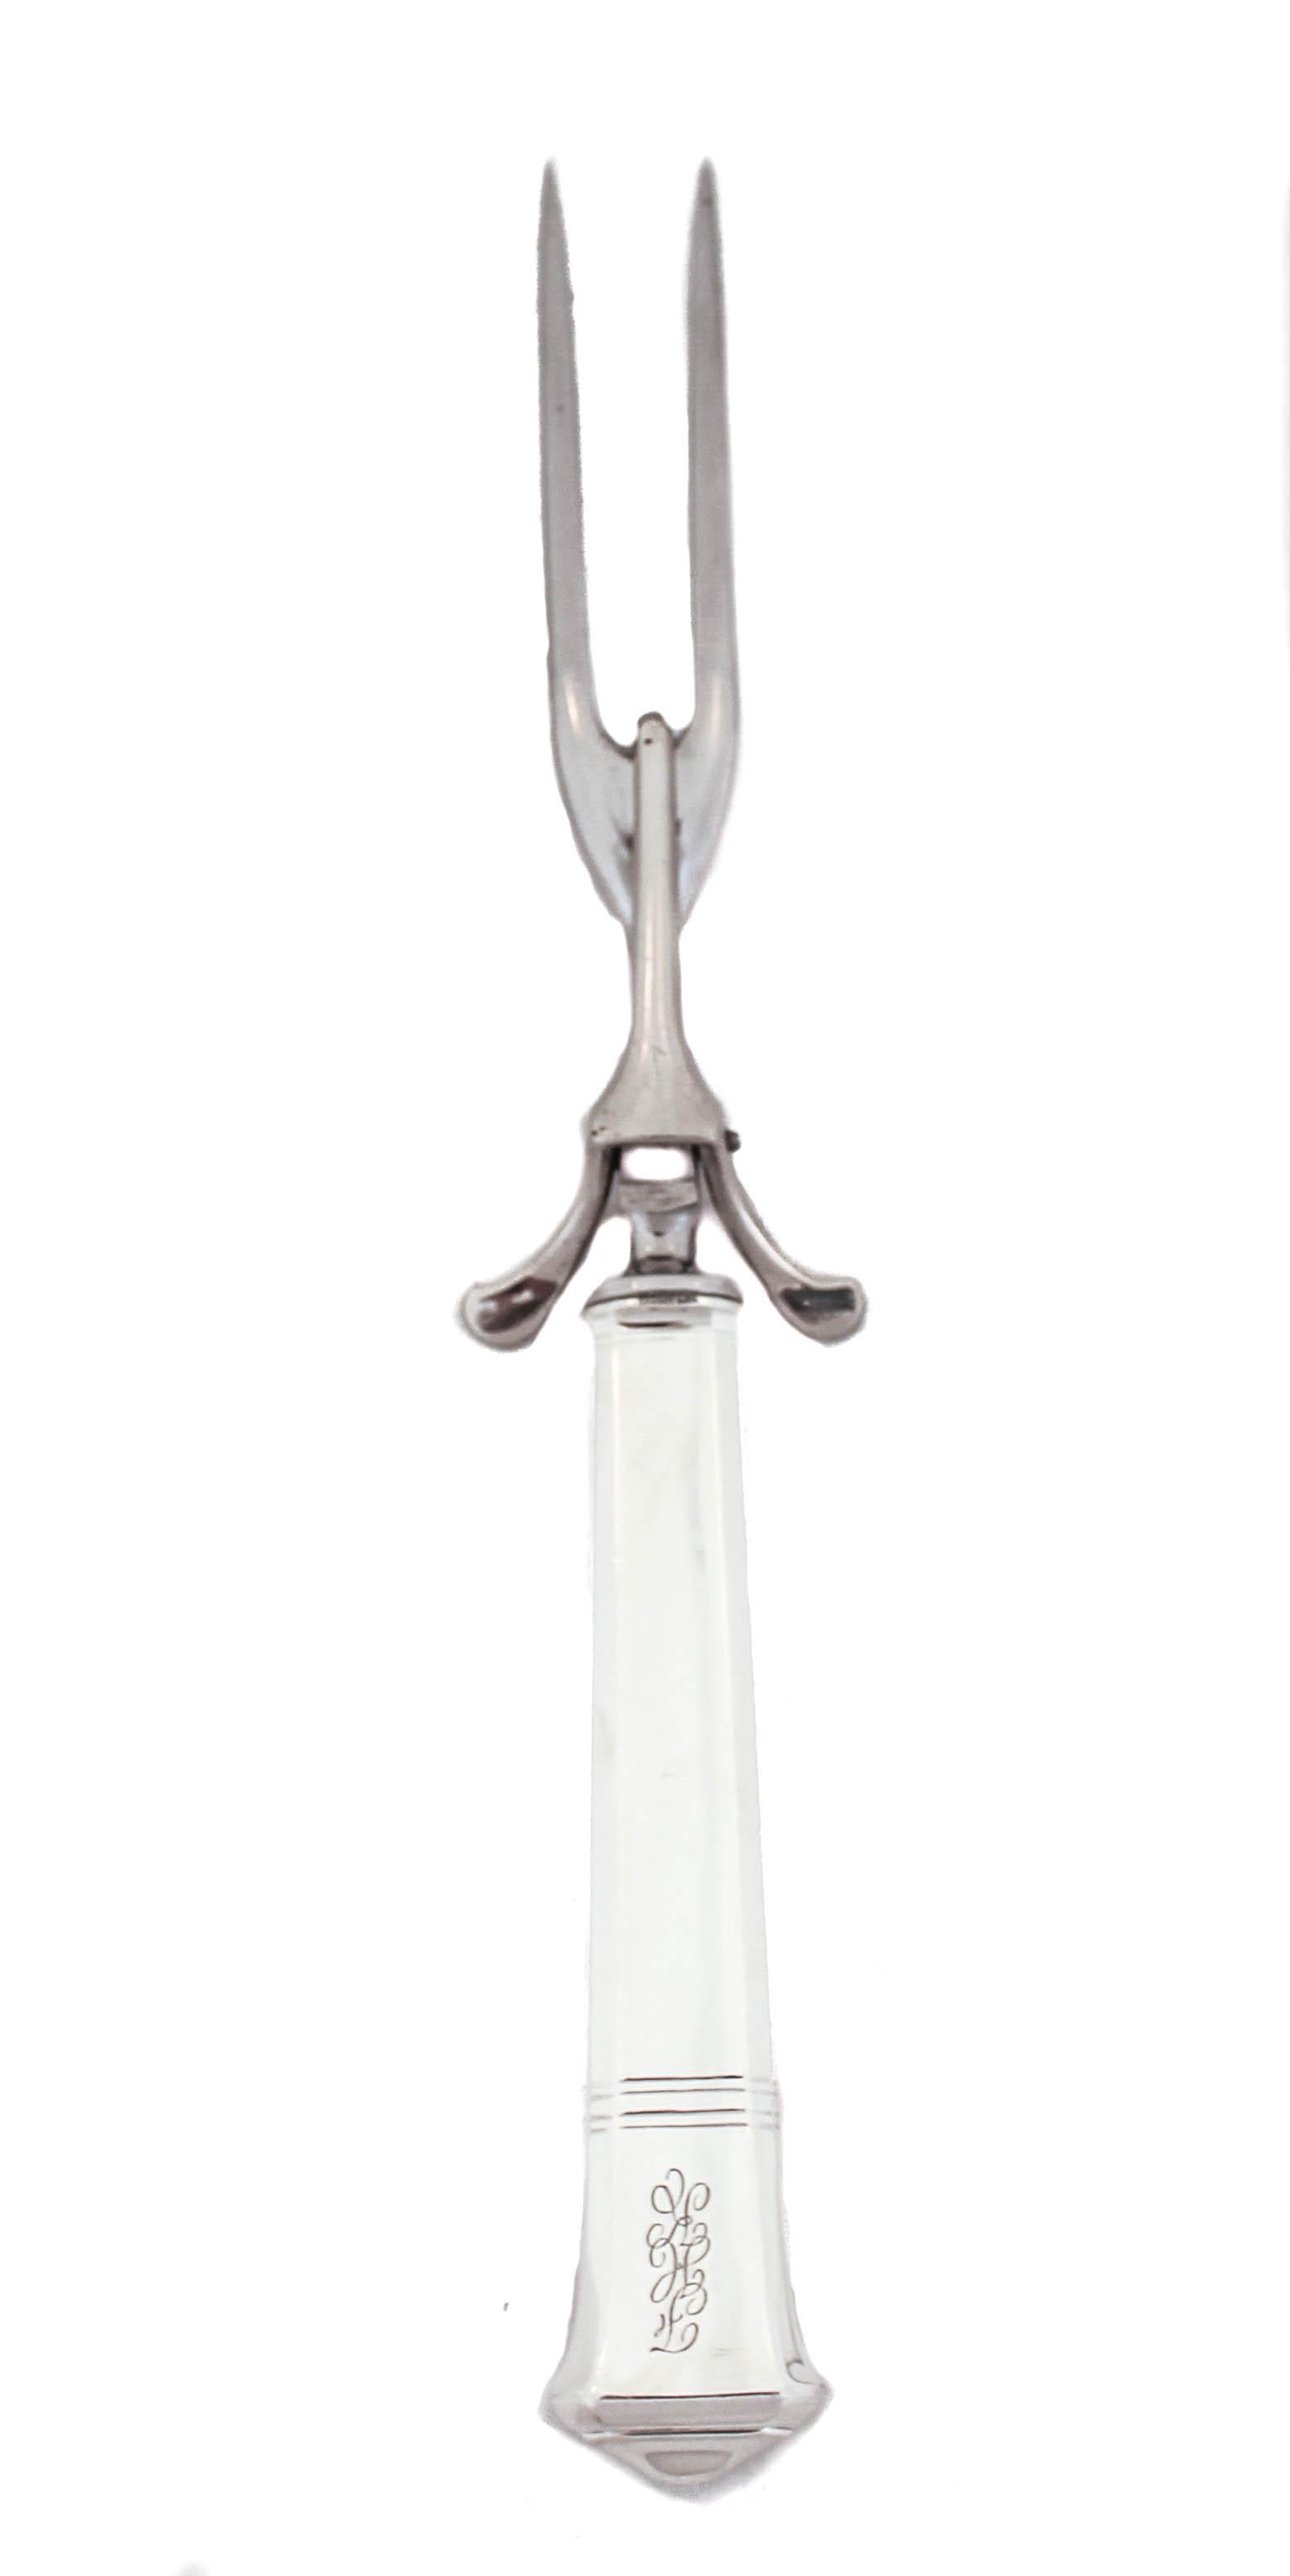 Being offered is a sterling silver three-piece carving set in “Windham” pattern by Tiffany & CO, circa 1950.  The set includes a carving fork and knife and a sharpening steel to keep your blade in pristine condition.  The “Windham” pattern is known